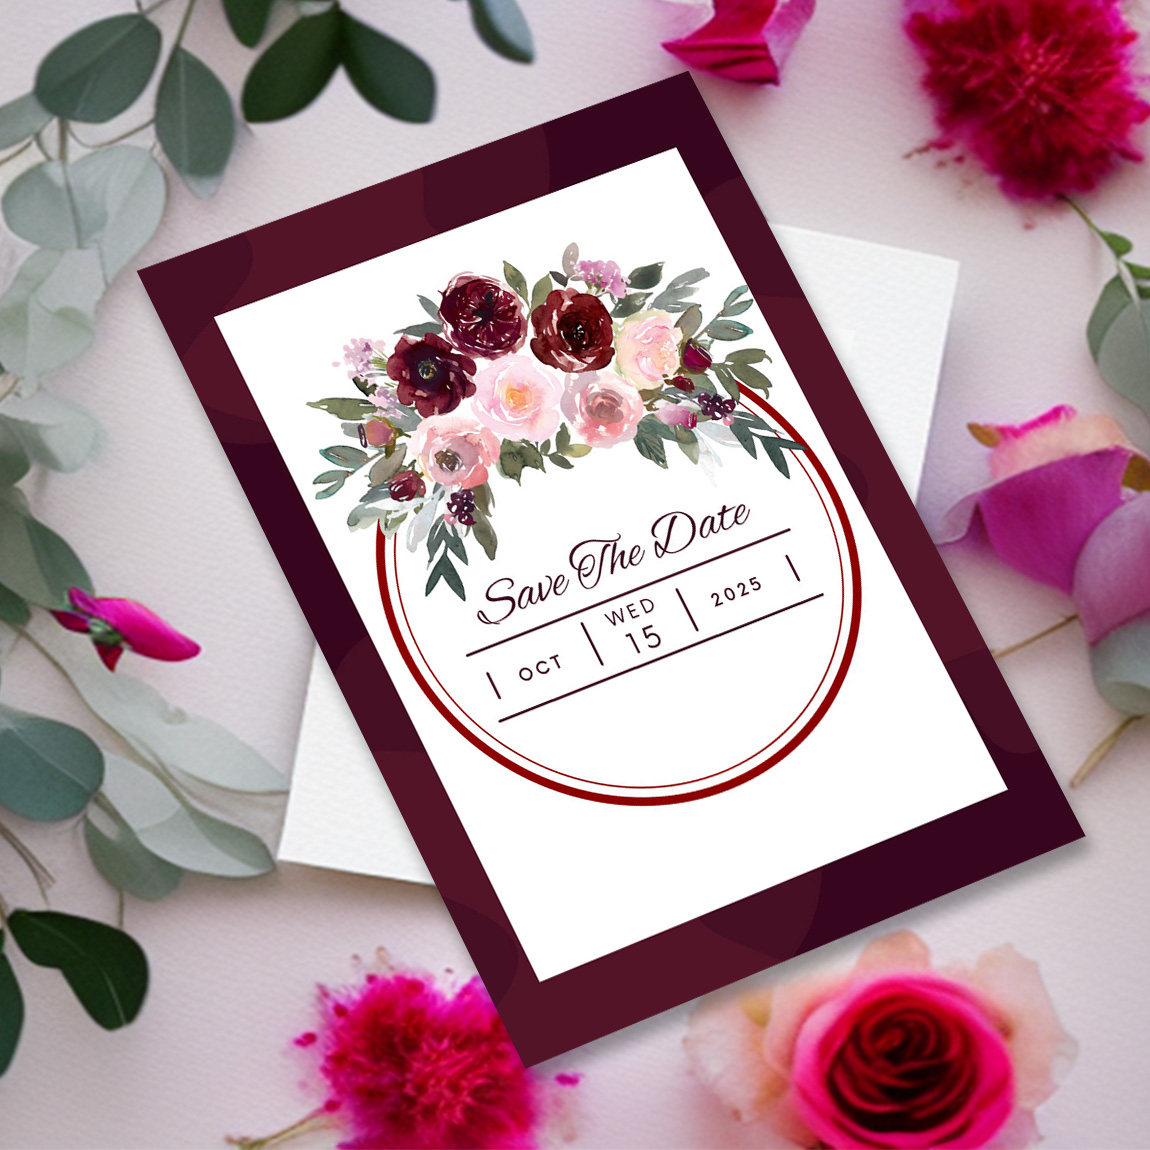 Image with charming wedding invitation in burgundy colors.